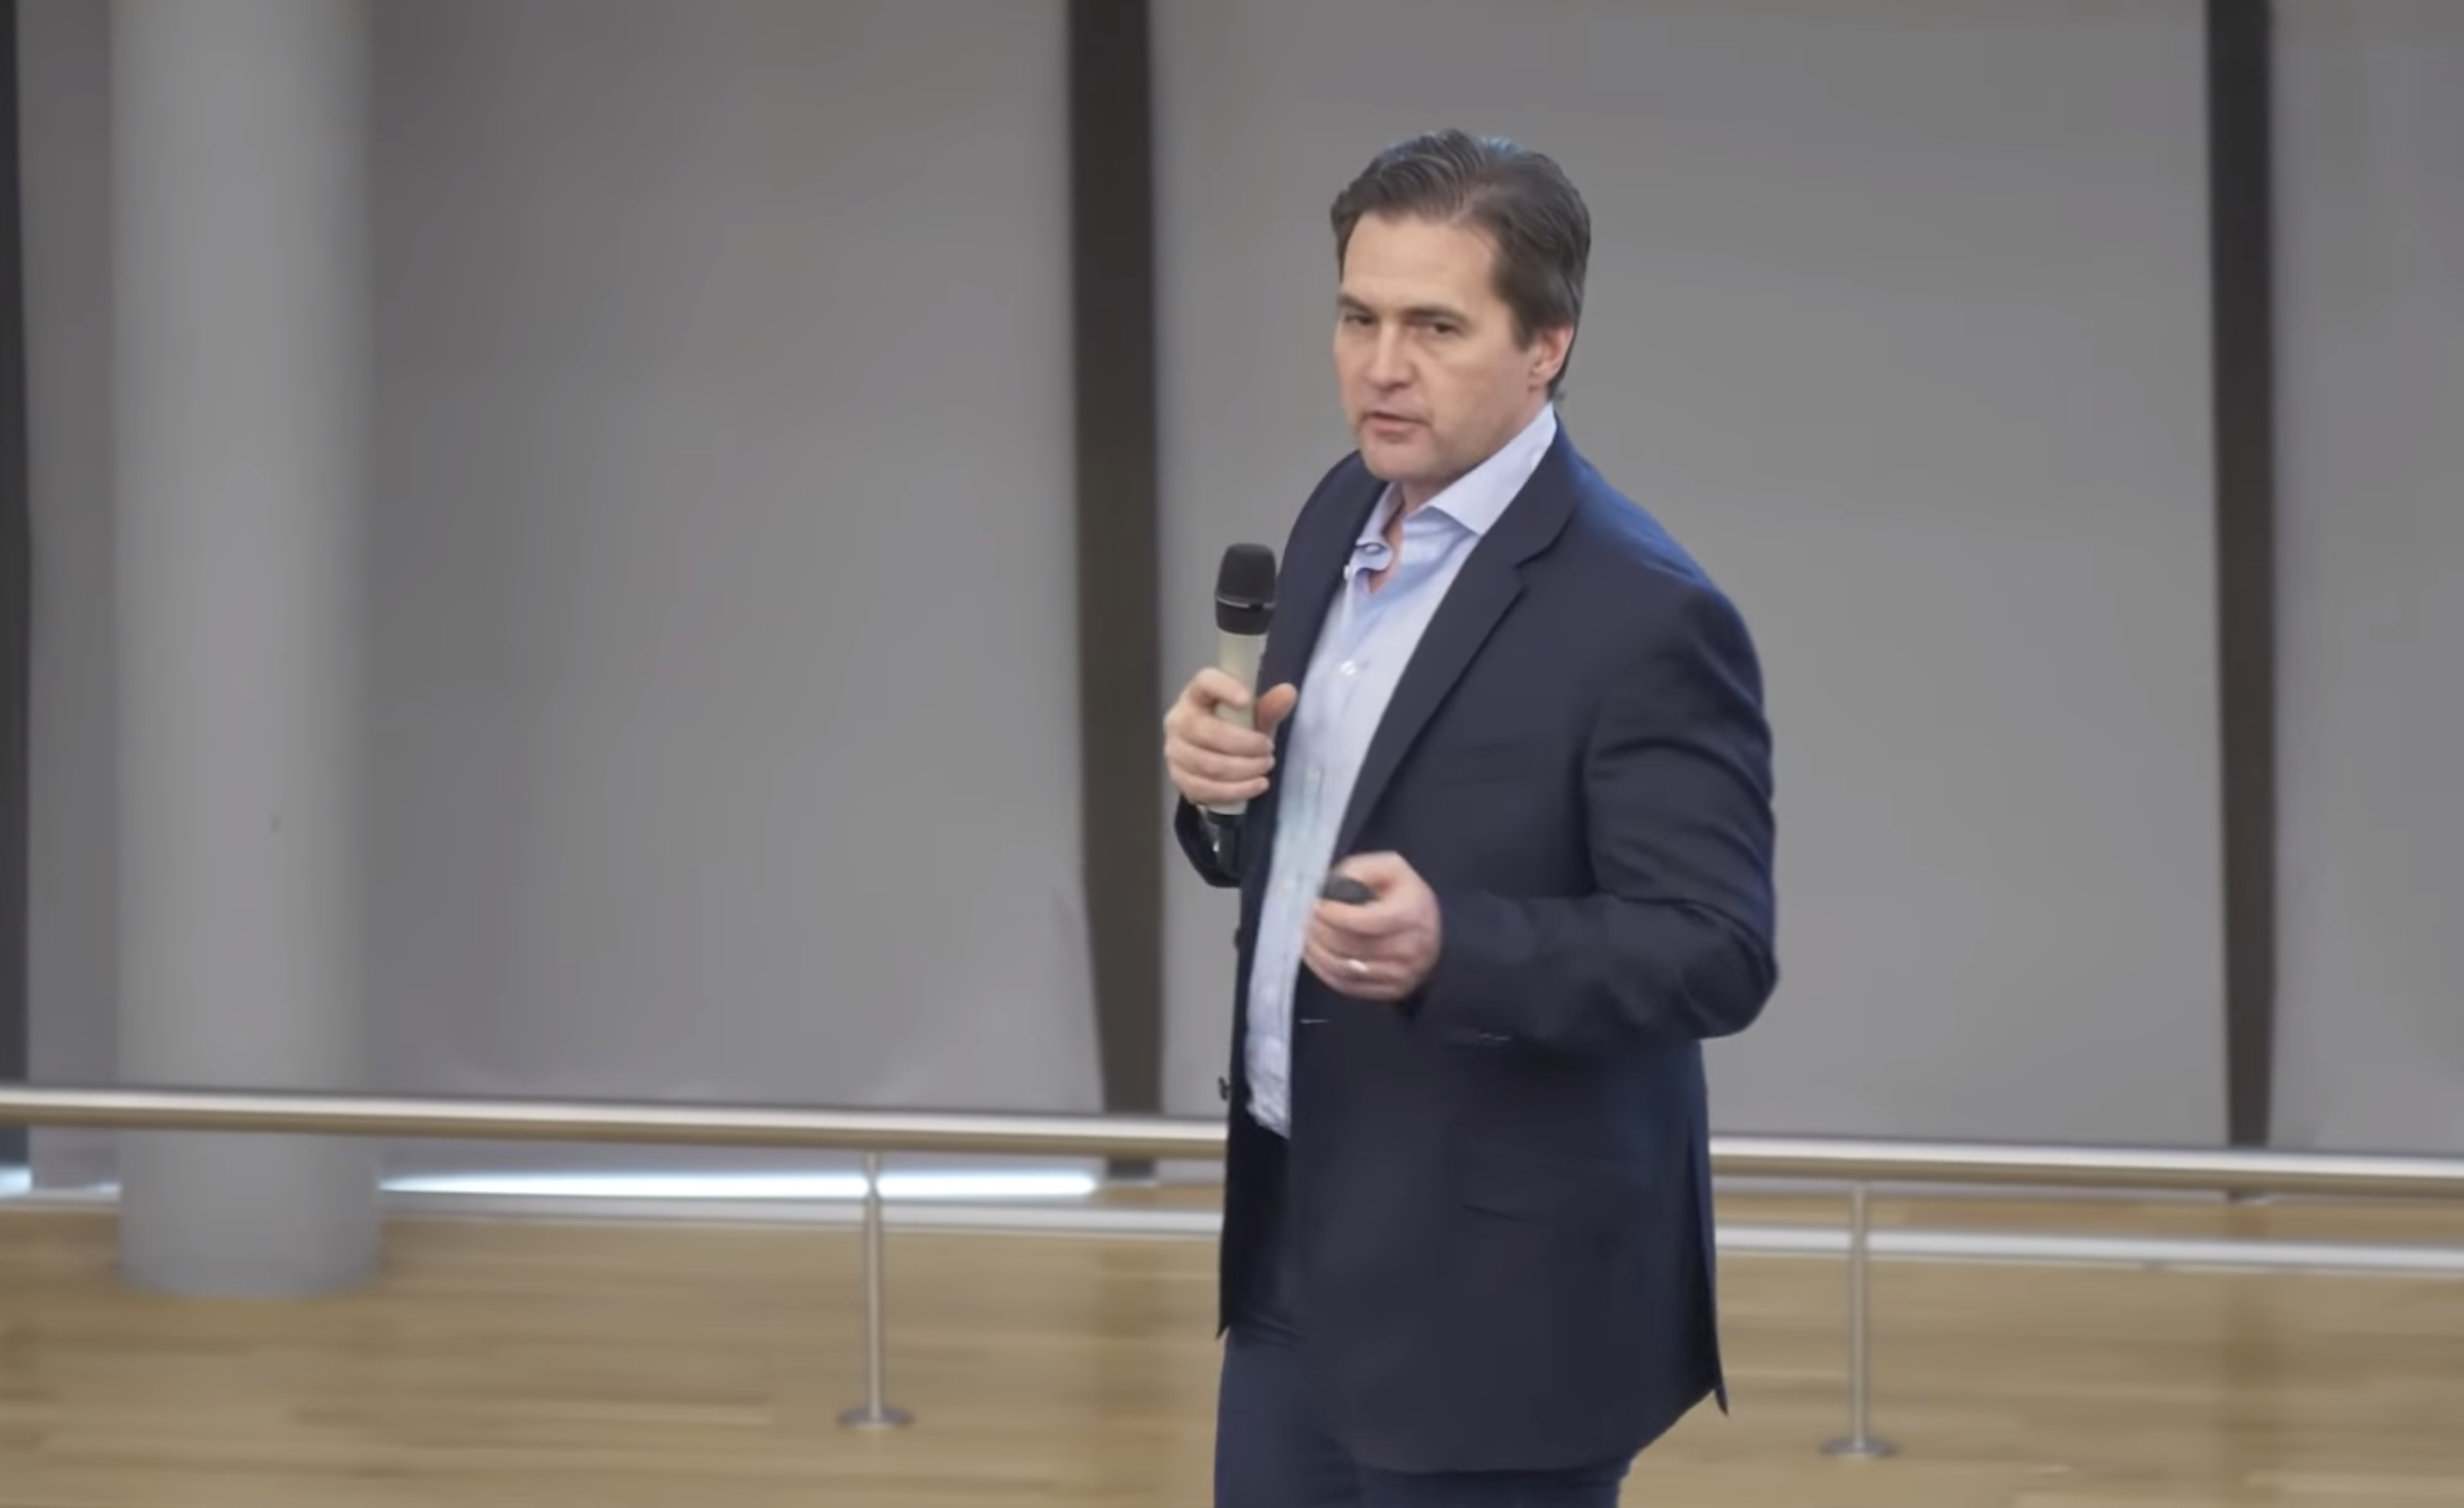 Judge Confirms Ruling: Craig Wright To Forfeit 50% Of Bitcoin Holdings